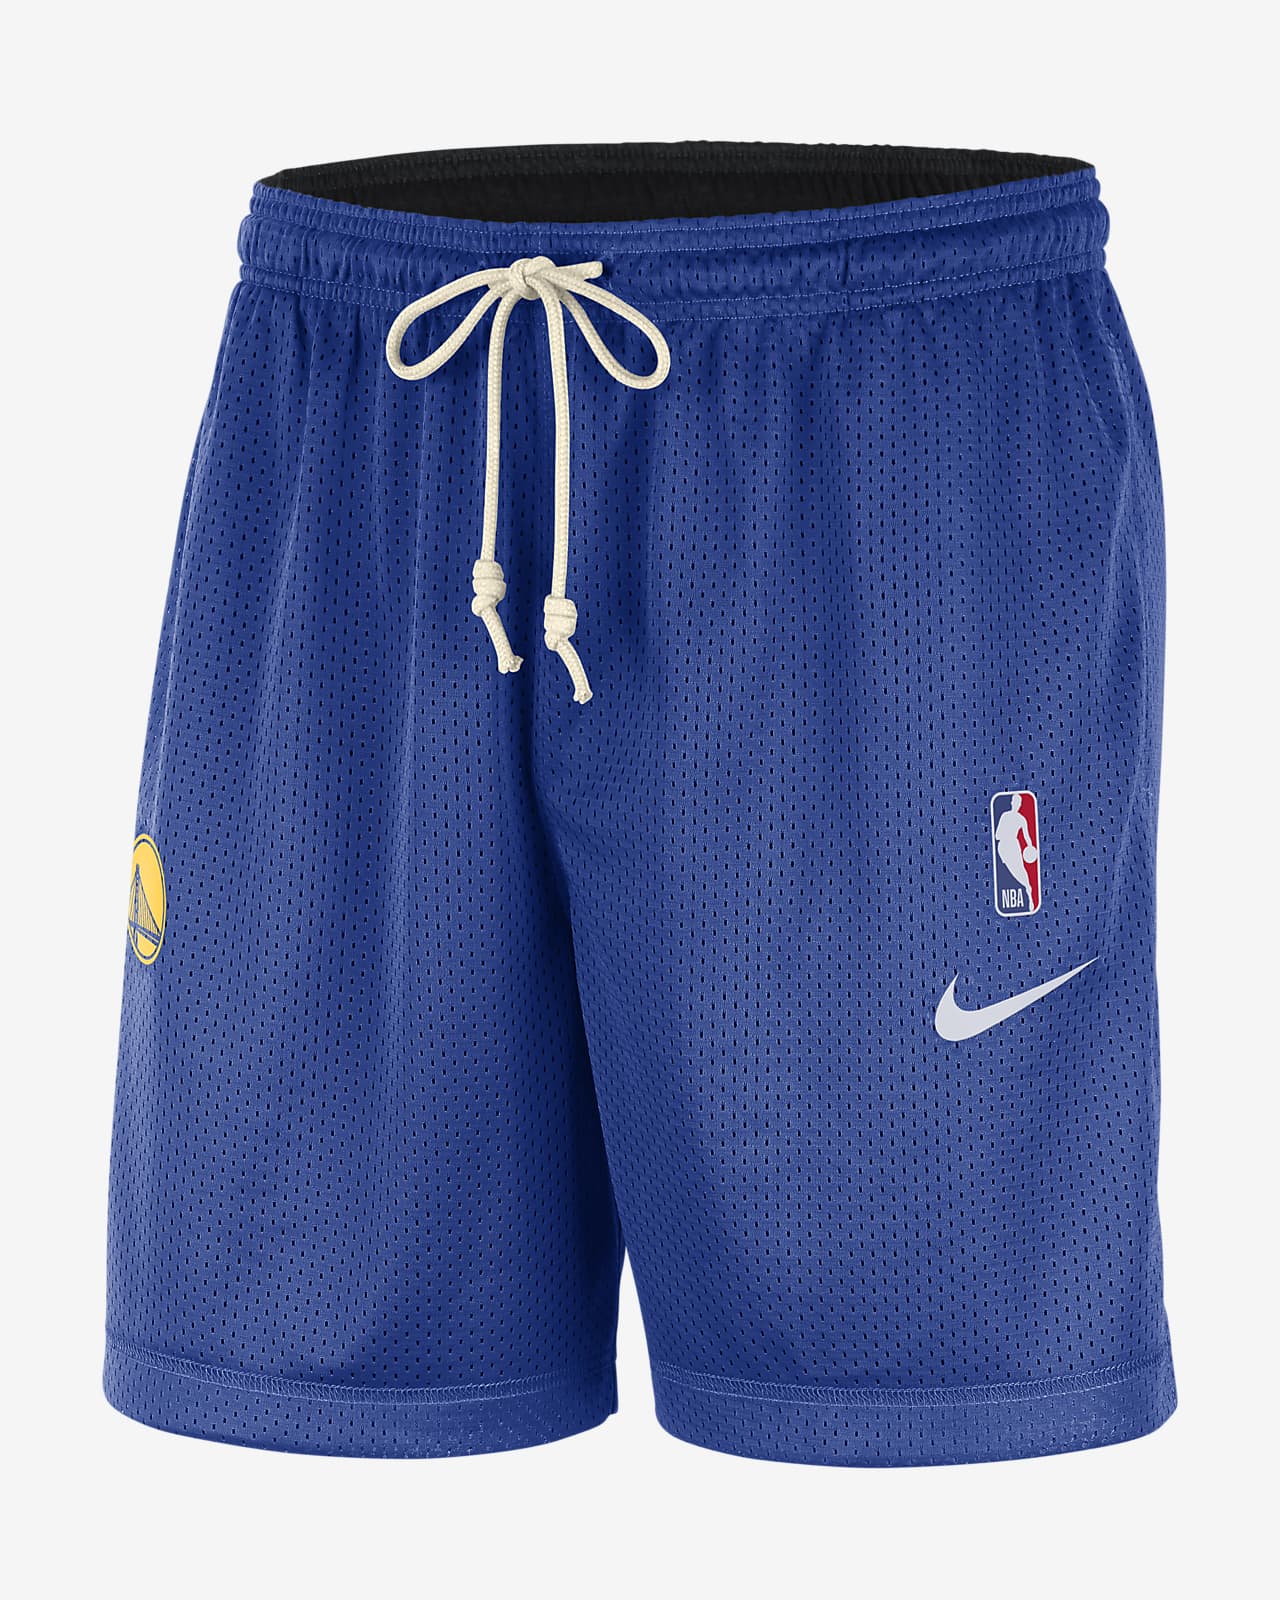 NIKE PRO NBA COMPRESSION SHORTS TEAM ISSUE PE 880802-419 Navy Blue